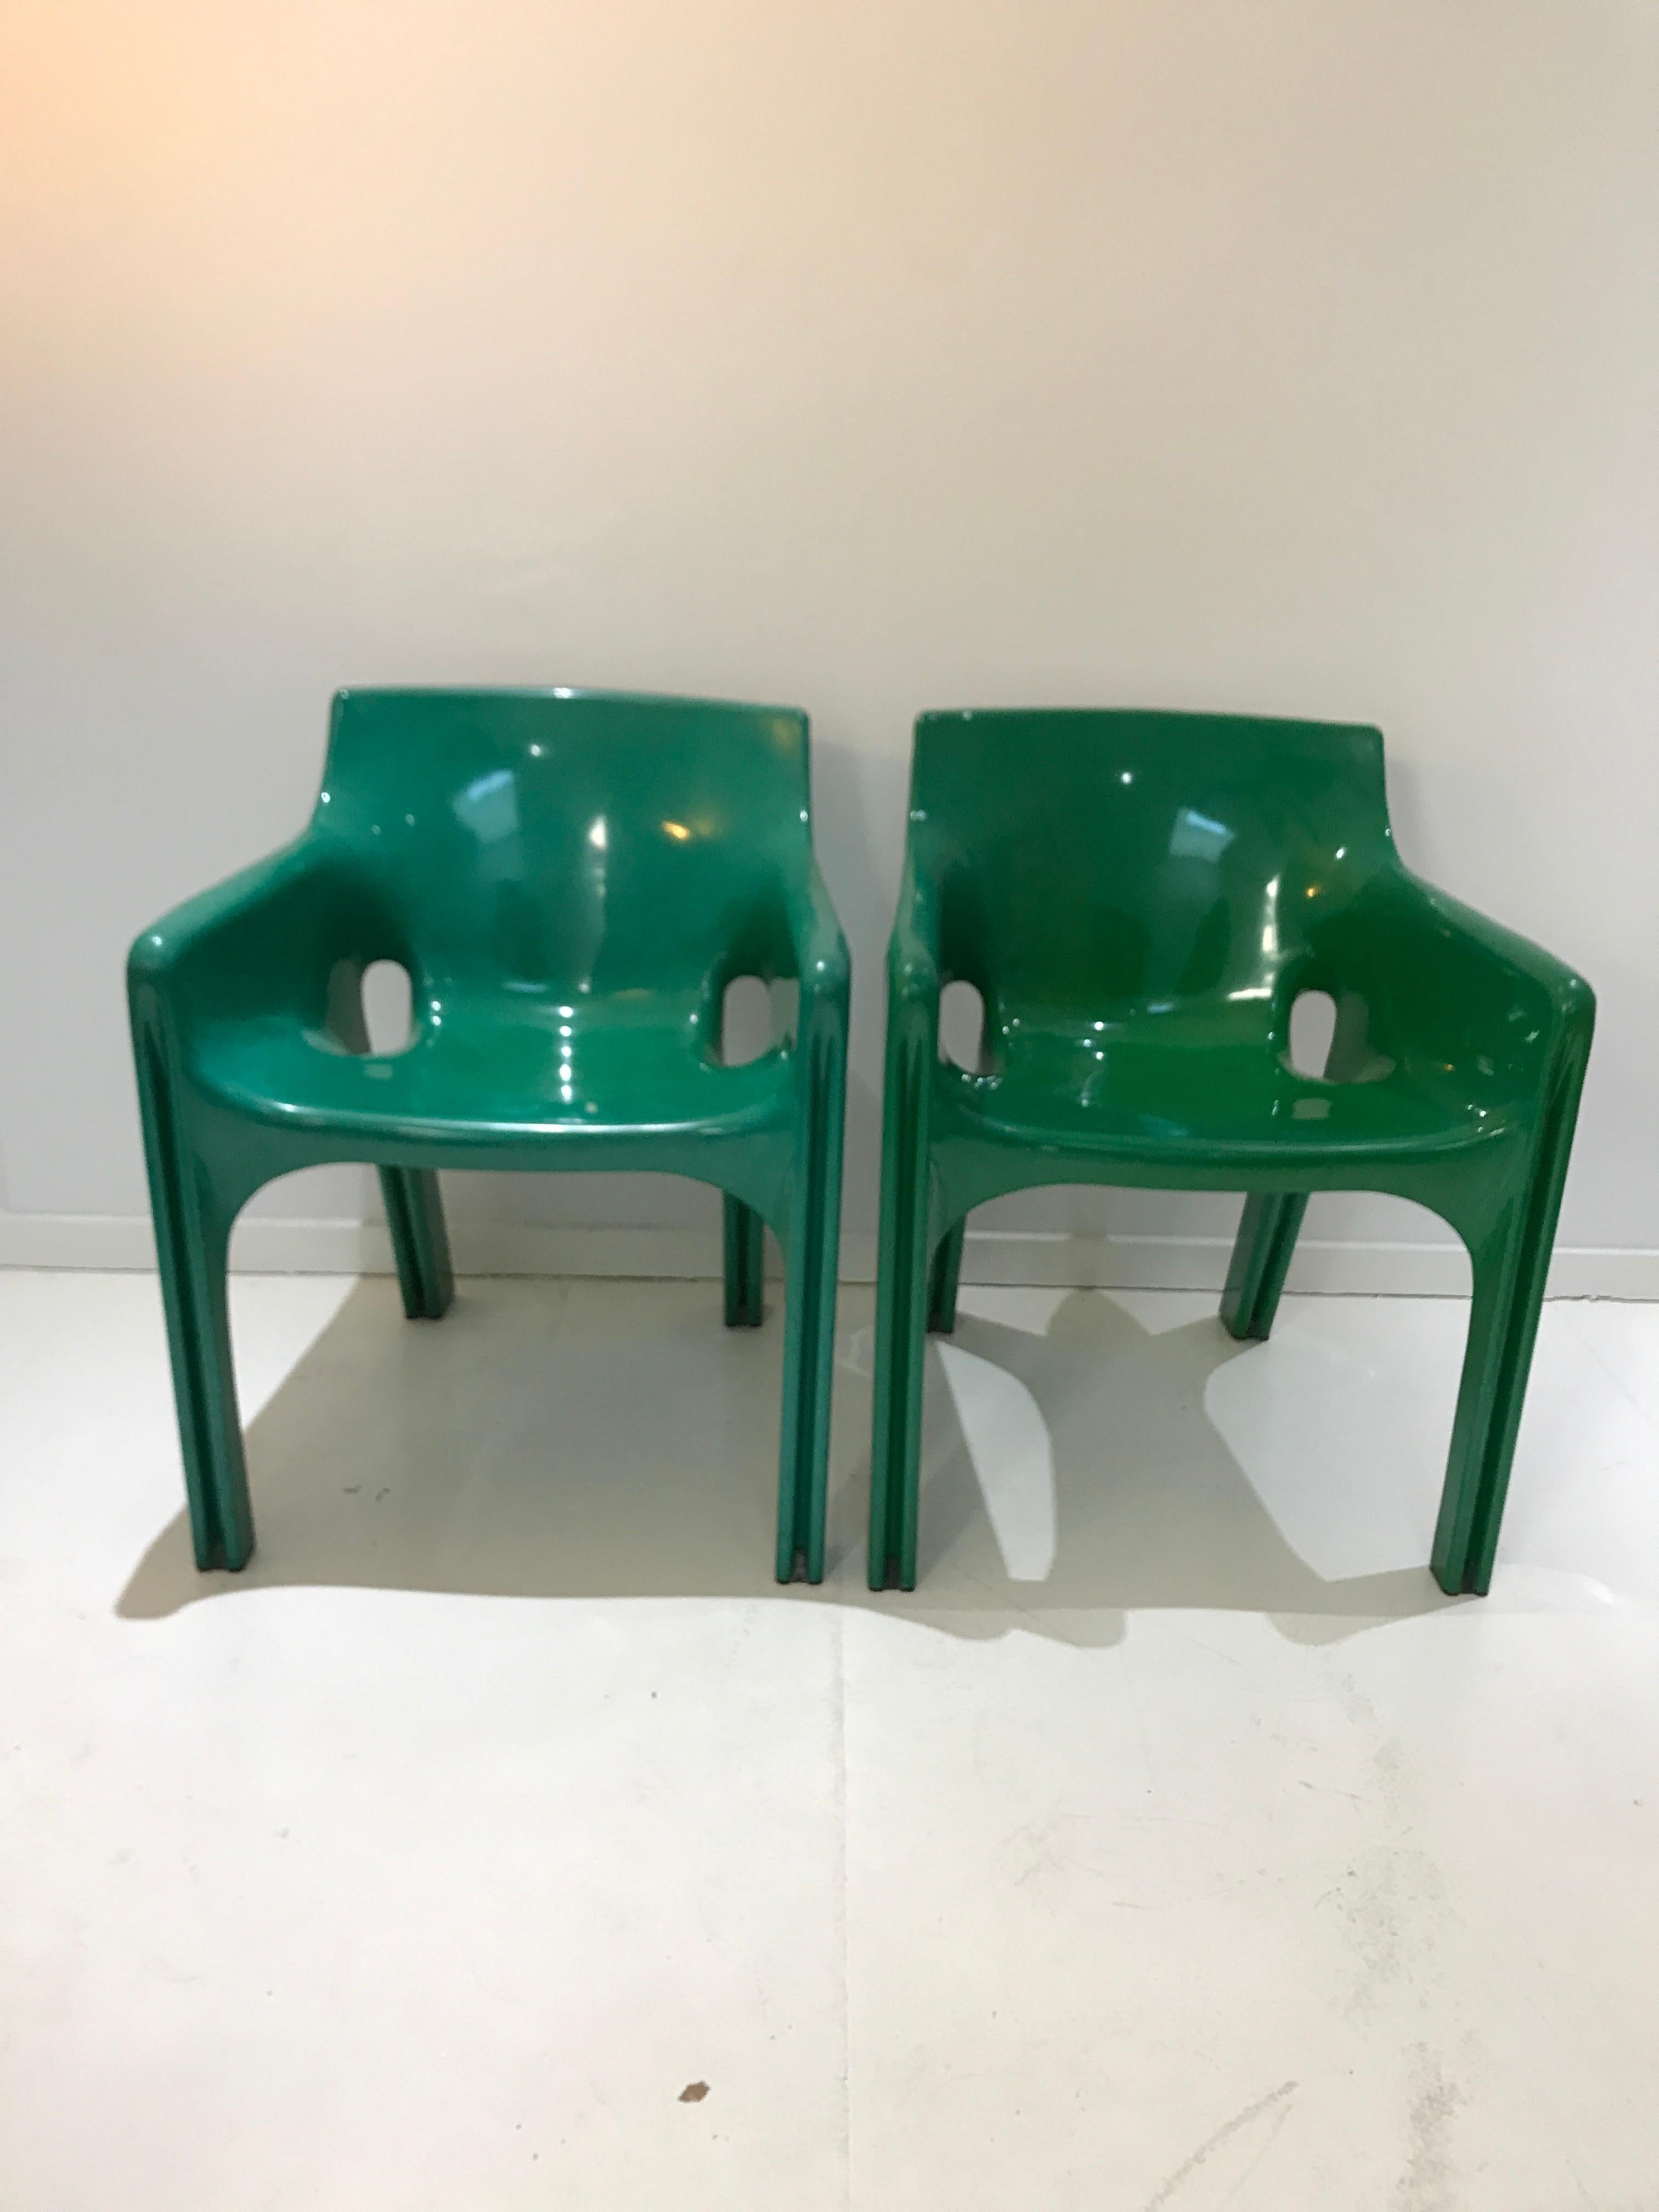 - Pair of model Gaudi chairs designed by Vico Magistretti
- Manufactured in Italy by Artemide in Milano
- Bright pea green color
- Good condition, both chairs have all their feet.